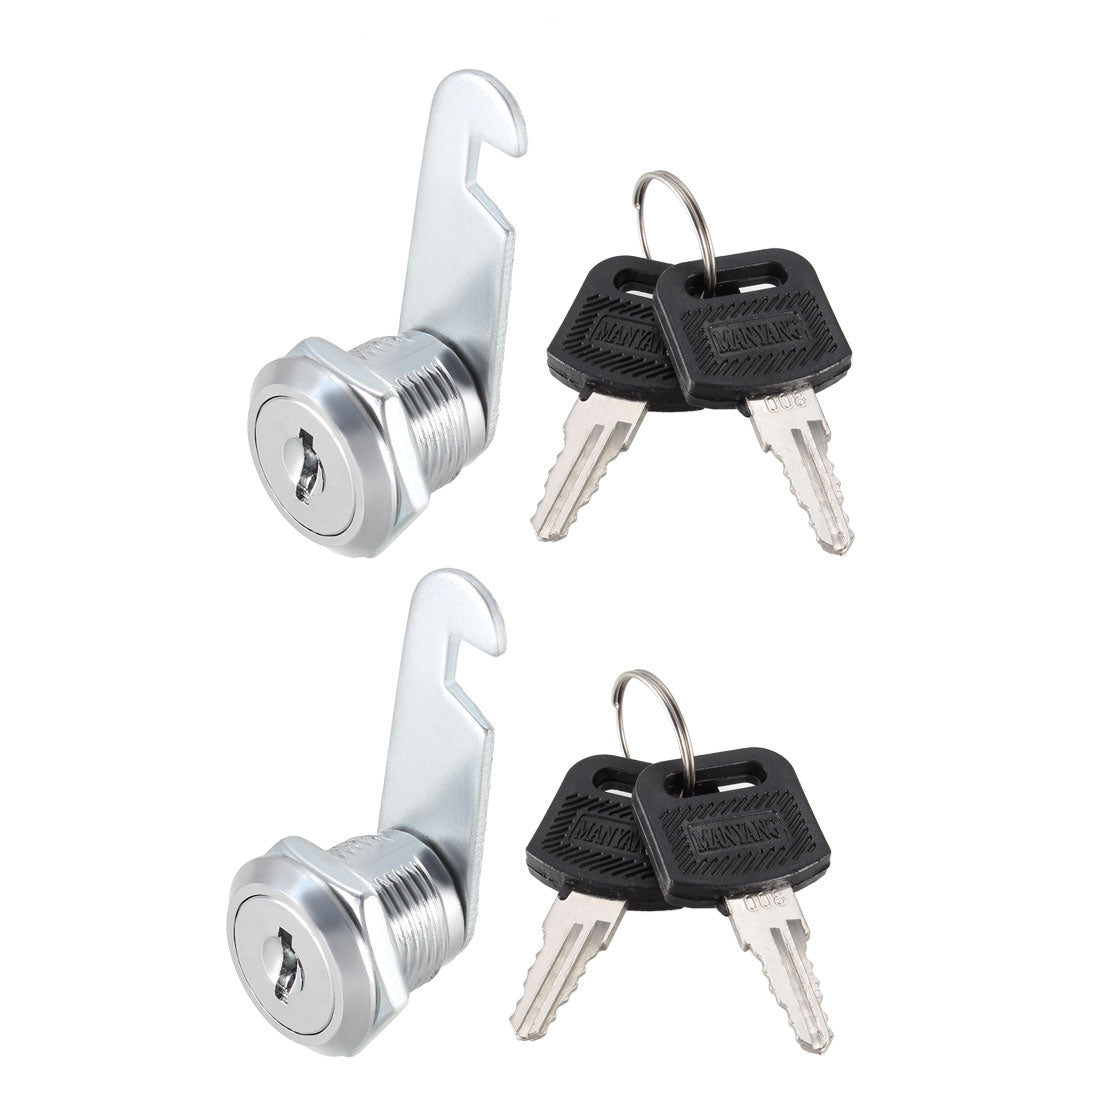 Uxcell Uxcell Cam Lock 25mm Cylinder Length Fit Up to 5/8-inch Thick Panel Keyed Alike 2Pcs